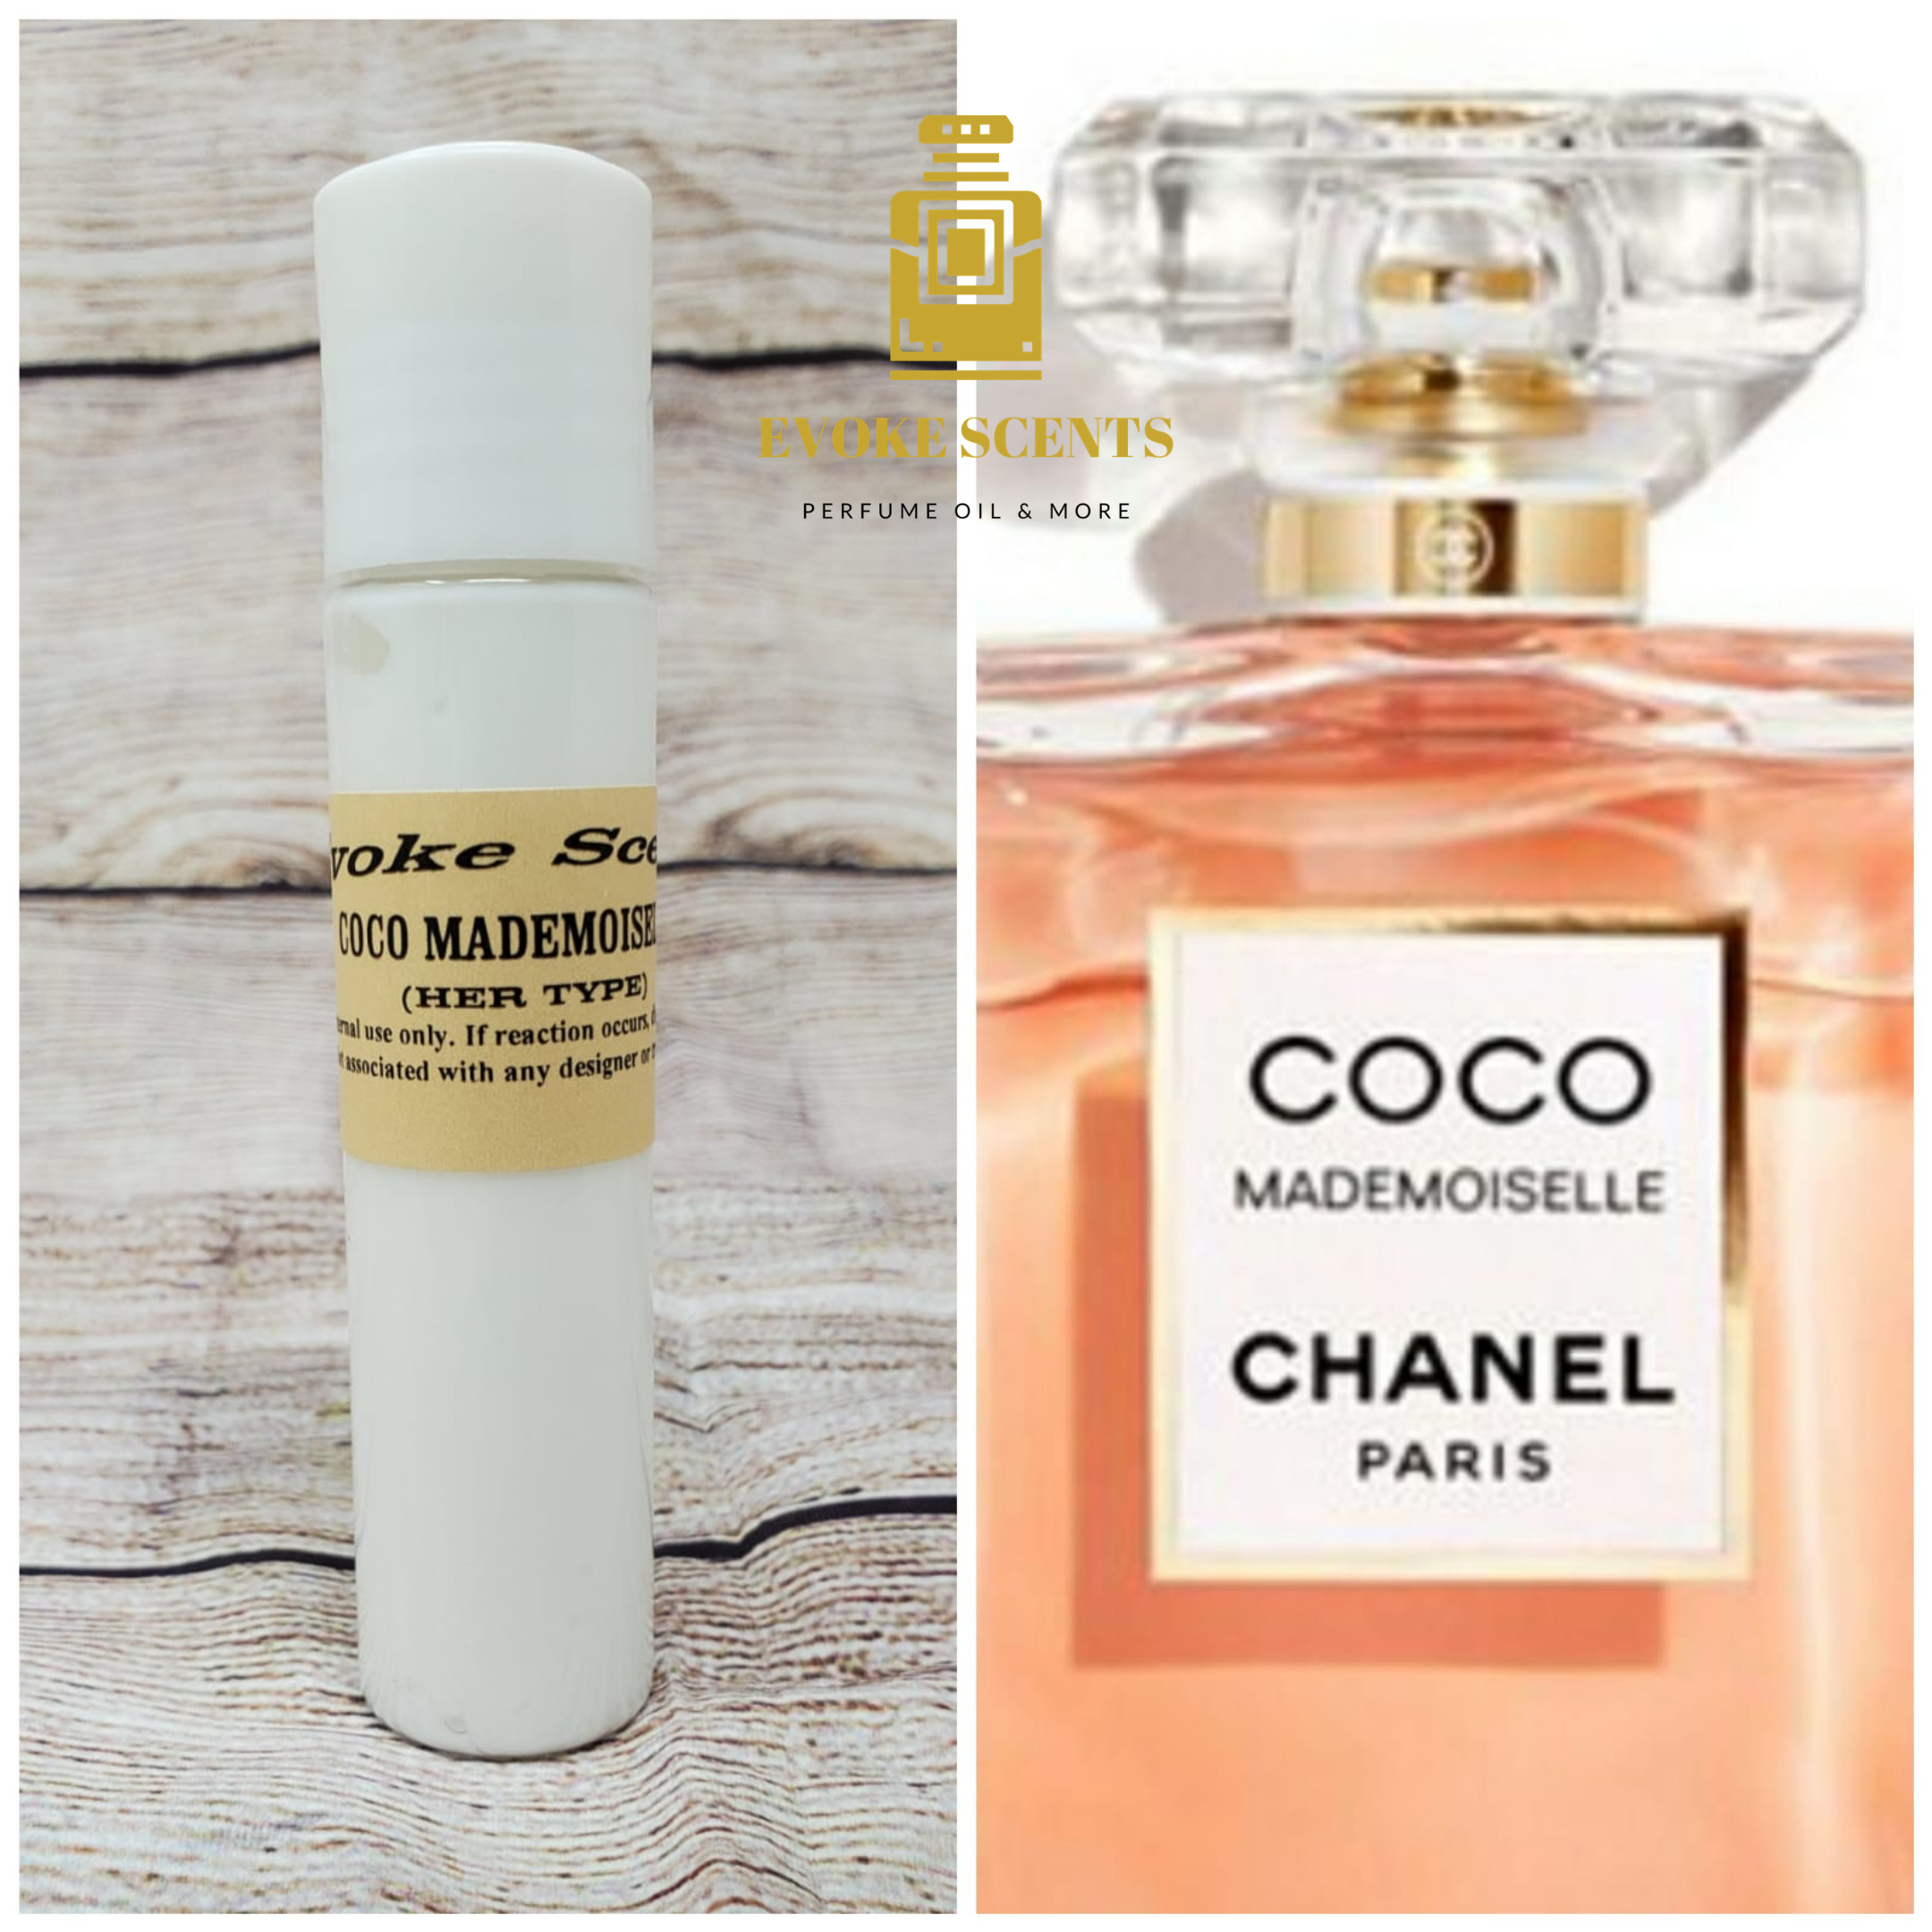 body lotion chanel coco mademoiselle